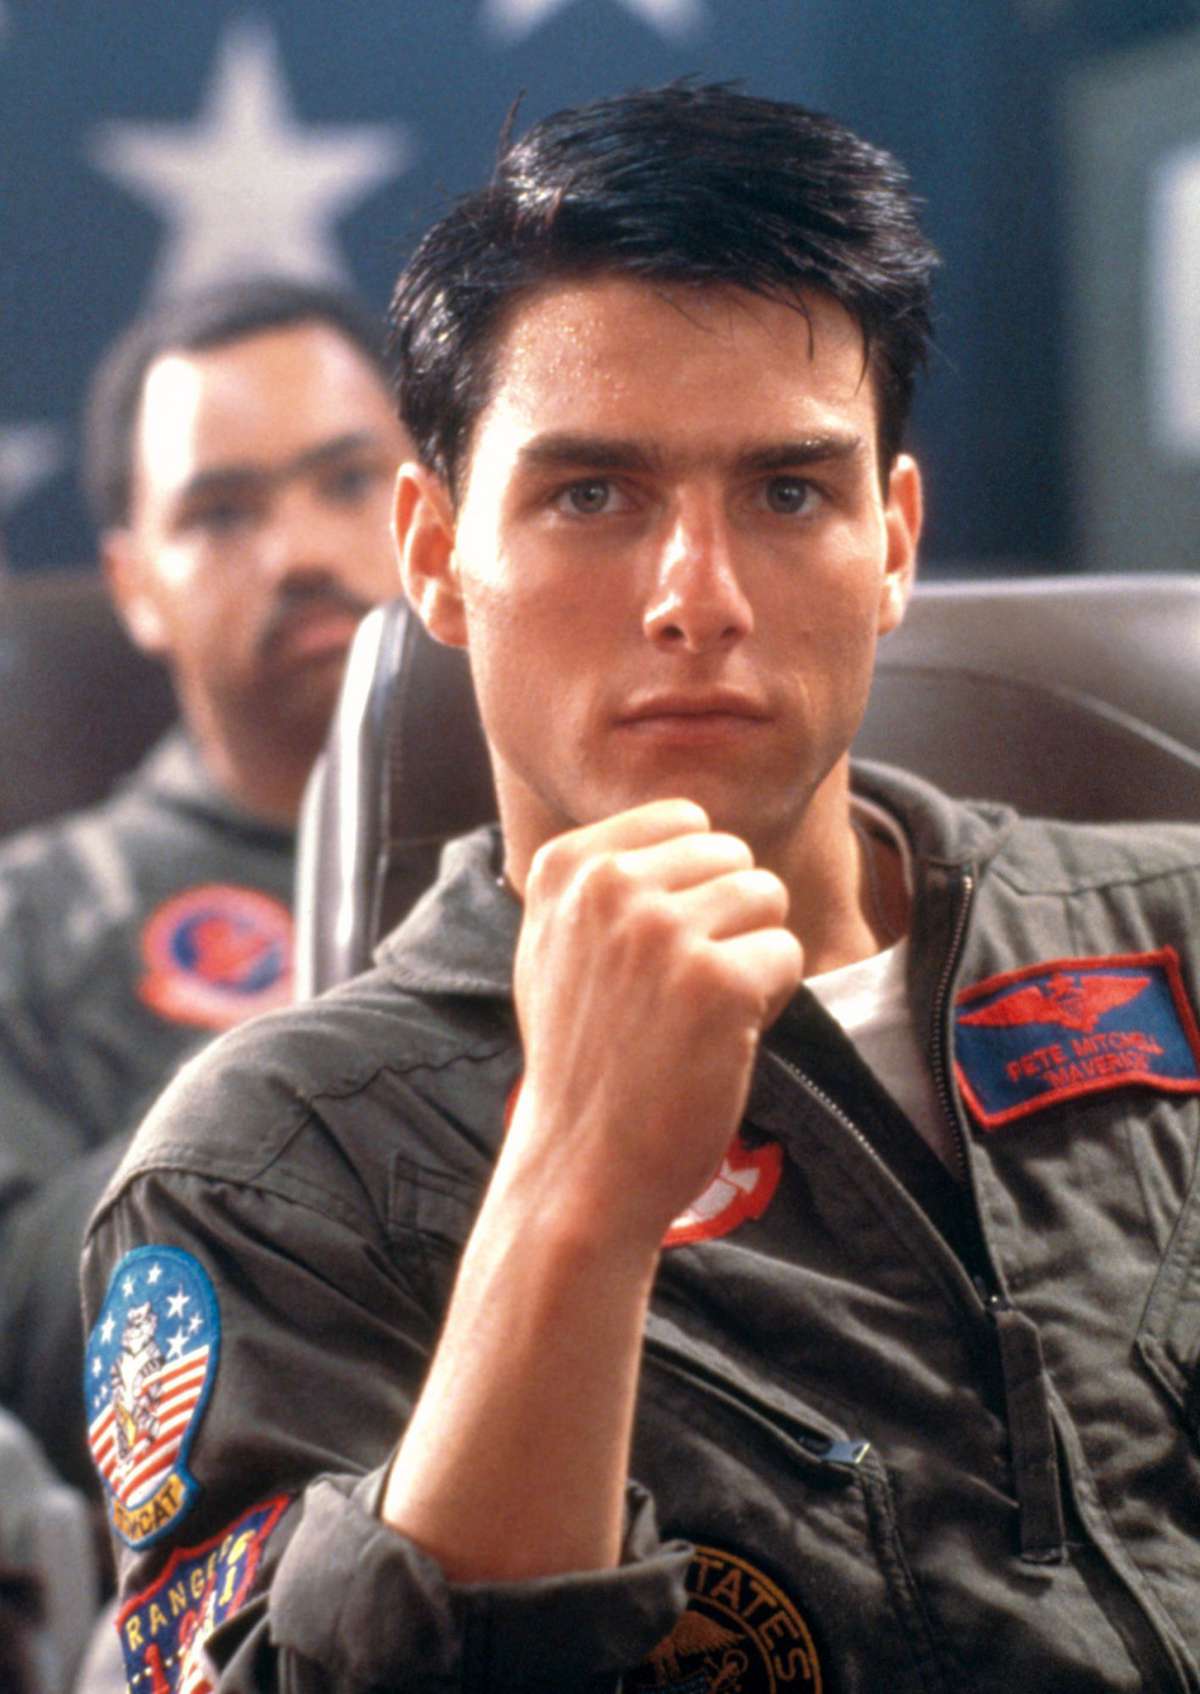 Young Tom Cruise Hairstyle in Top Gun